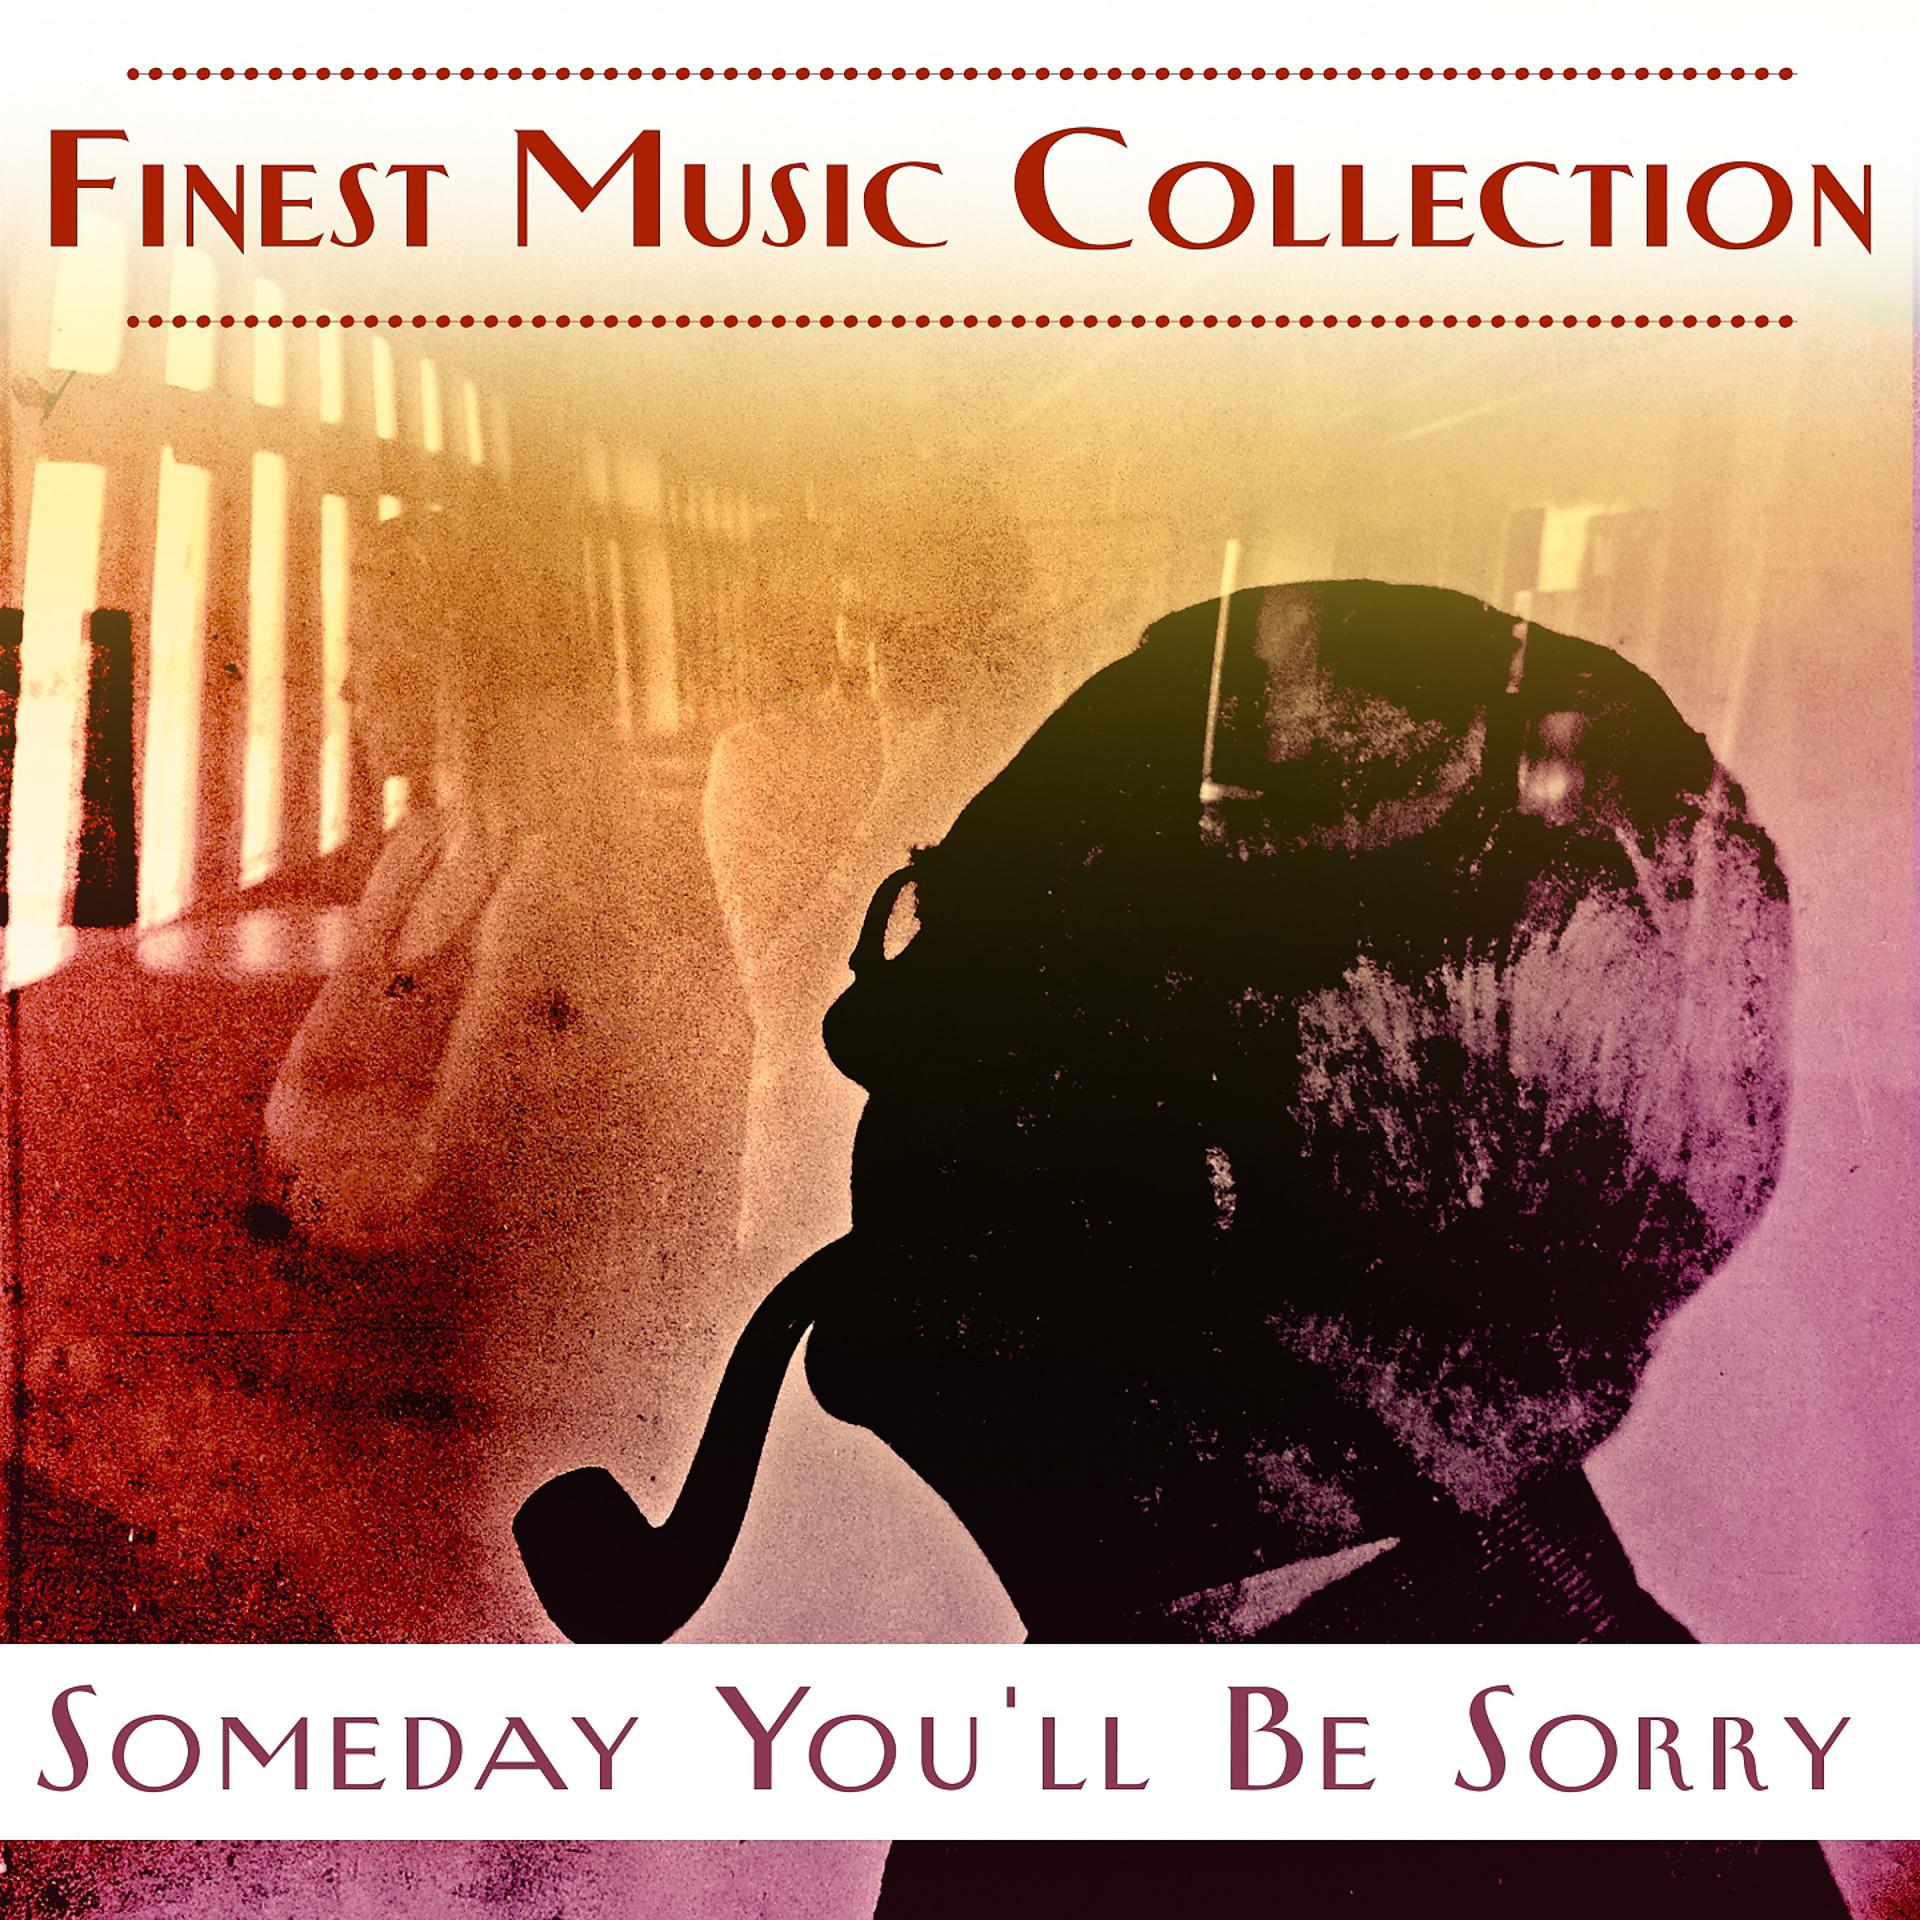 Постер альбома Finest Music Collection: Someday You'll Be Sorry